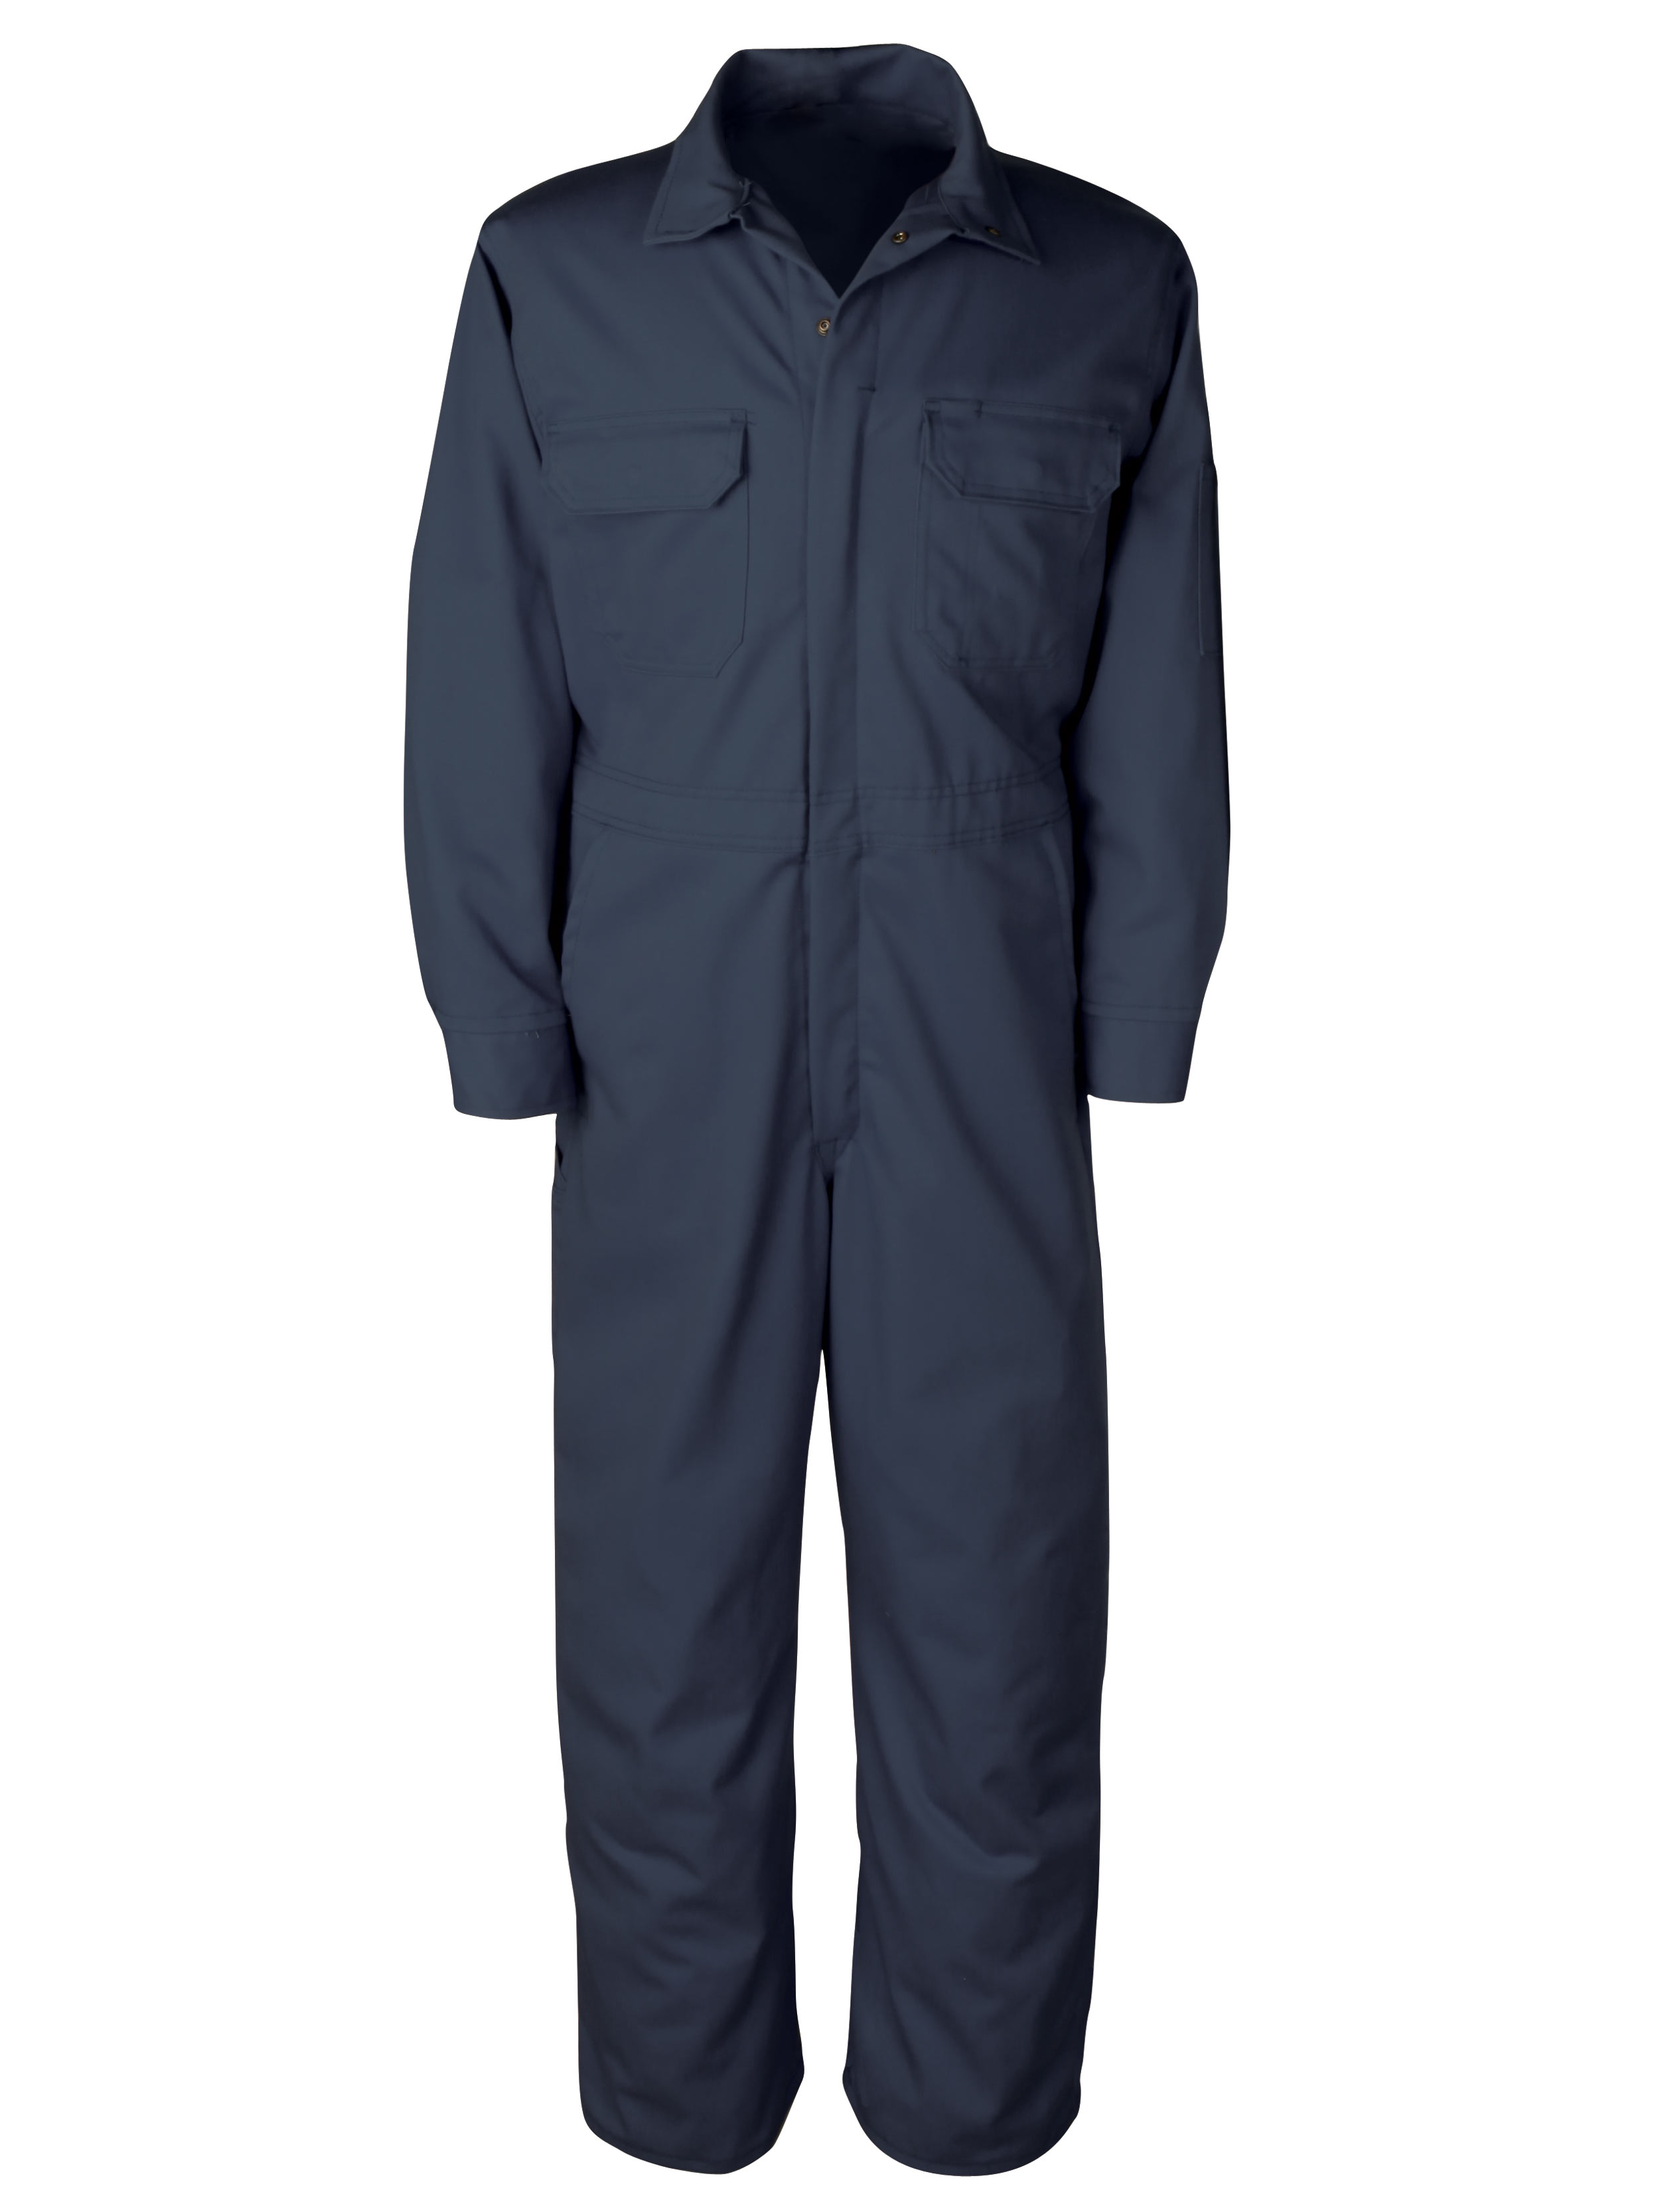 Big Bill 9 oz Westex™ Ultra Soft® Unlined Deluxe Coverall - 1622US9